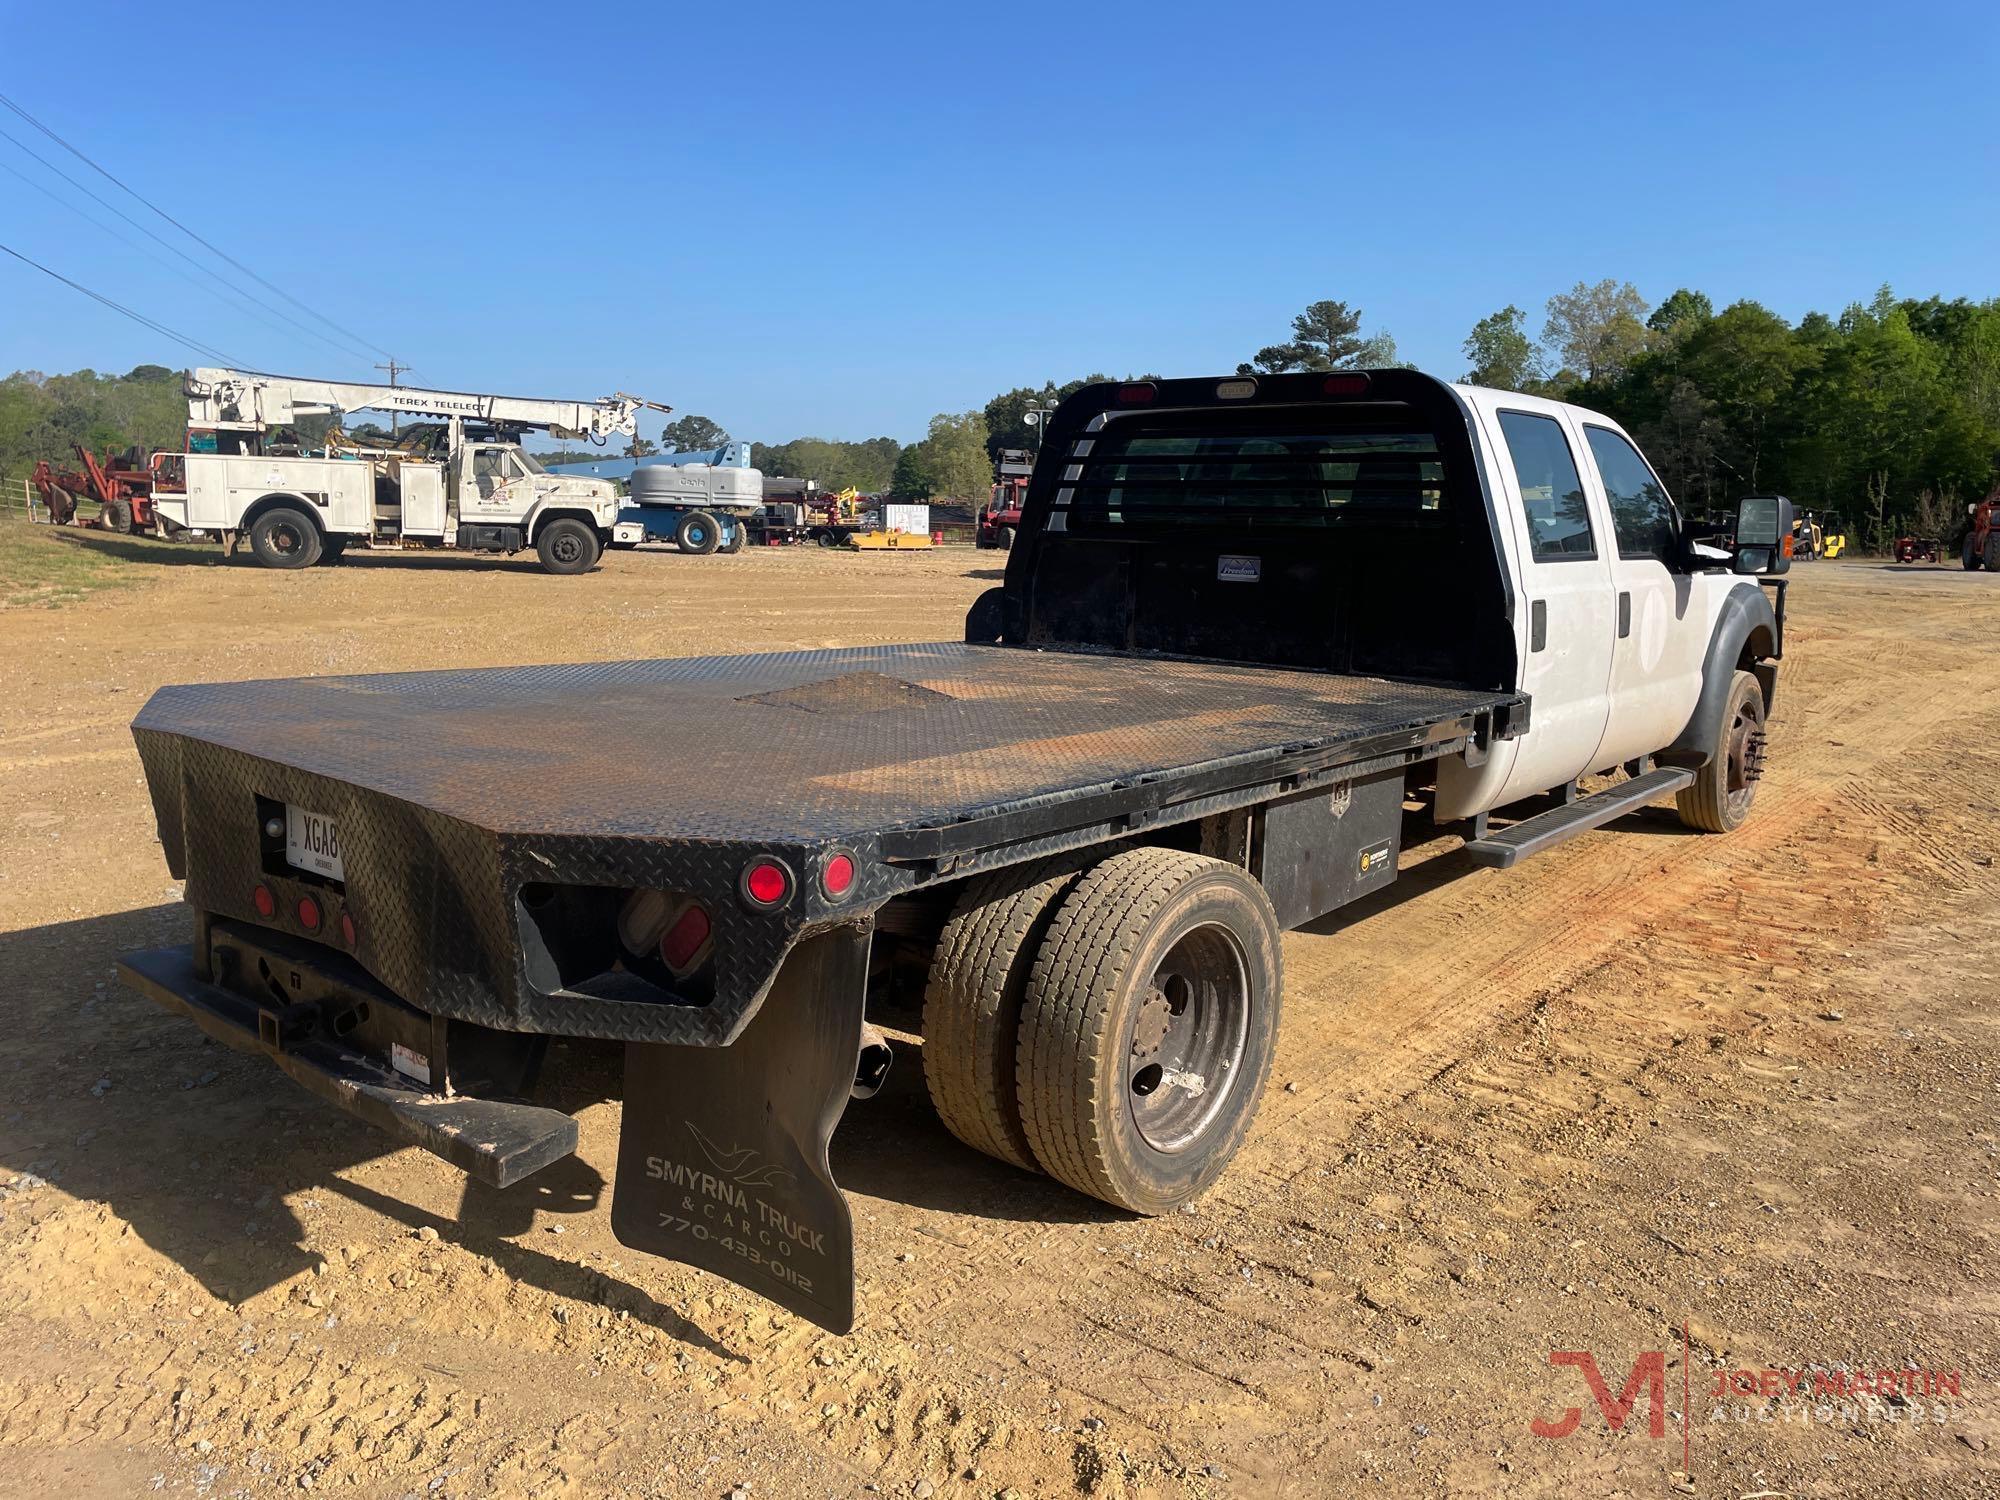 2011 FORD F-450 SUPER DUTY FLATBED TRUCK